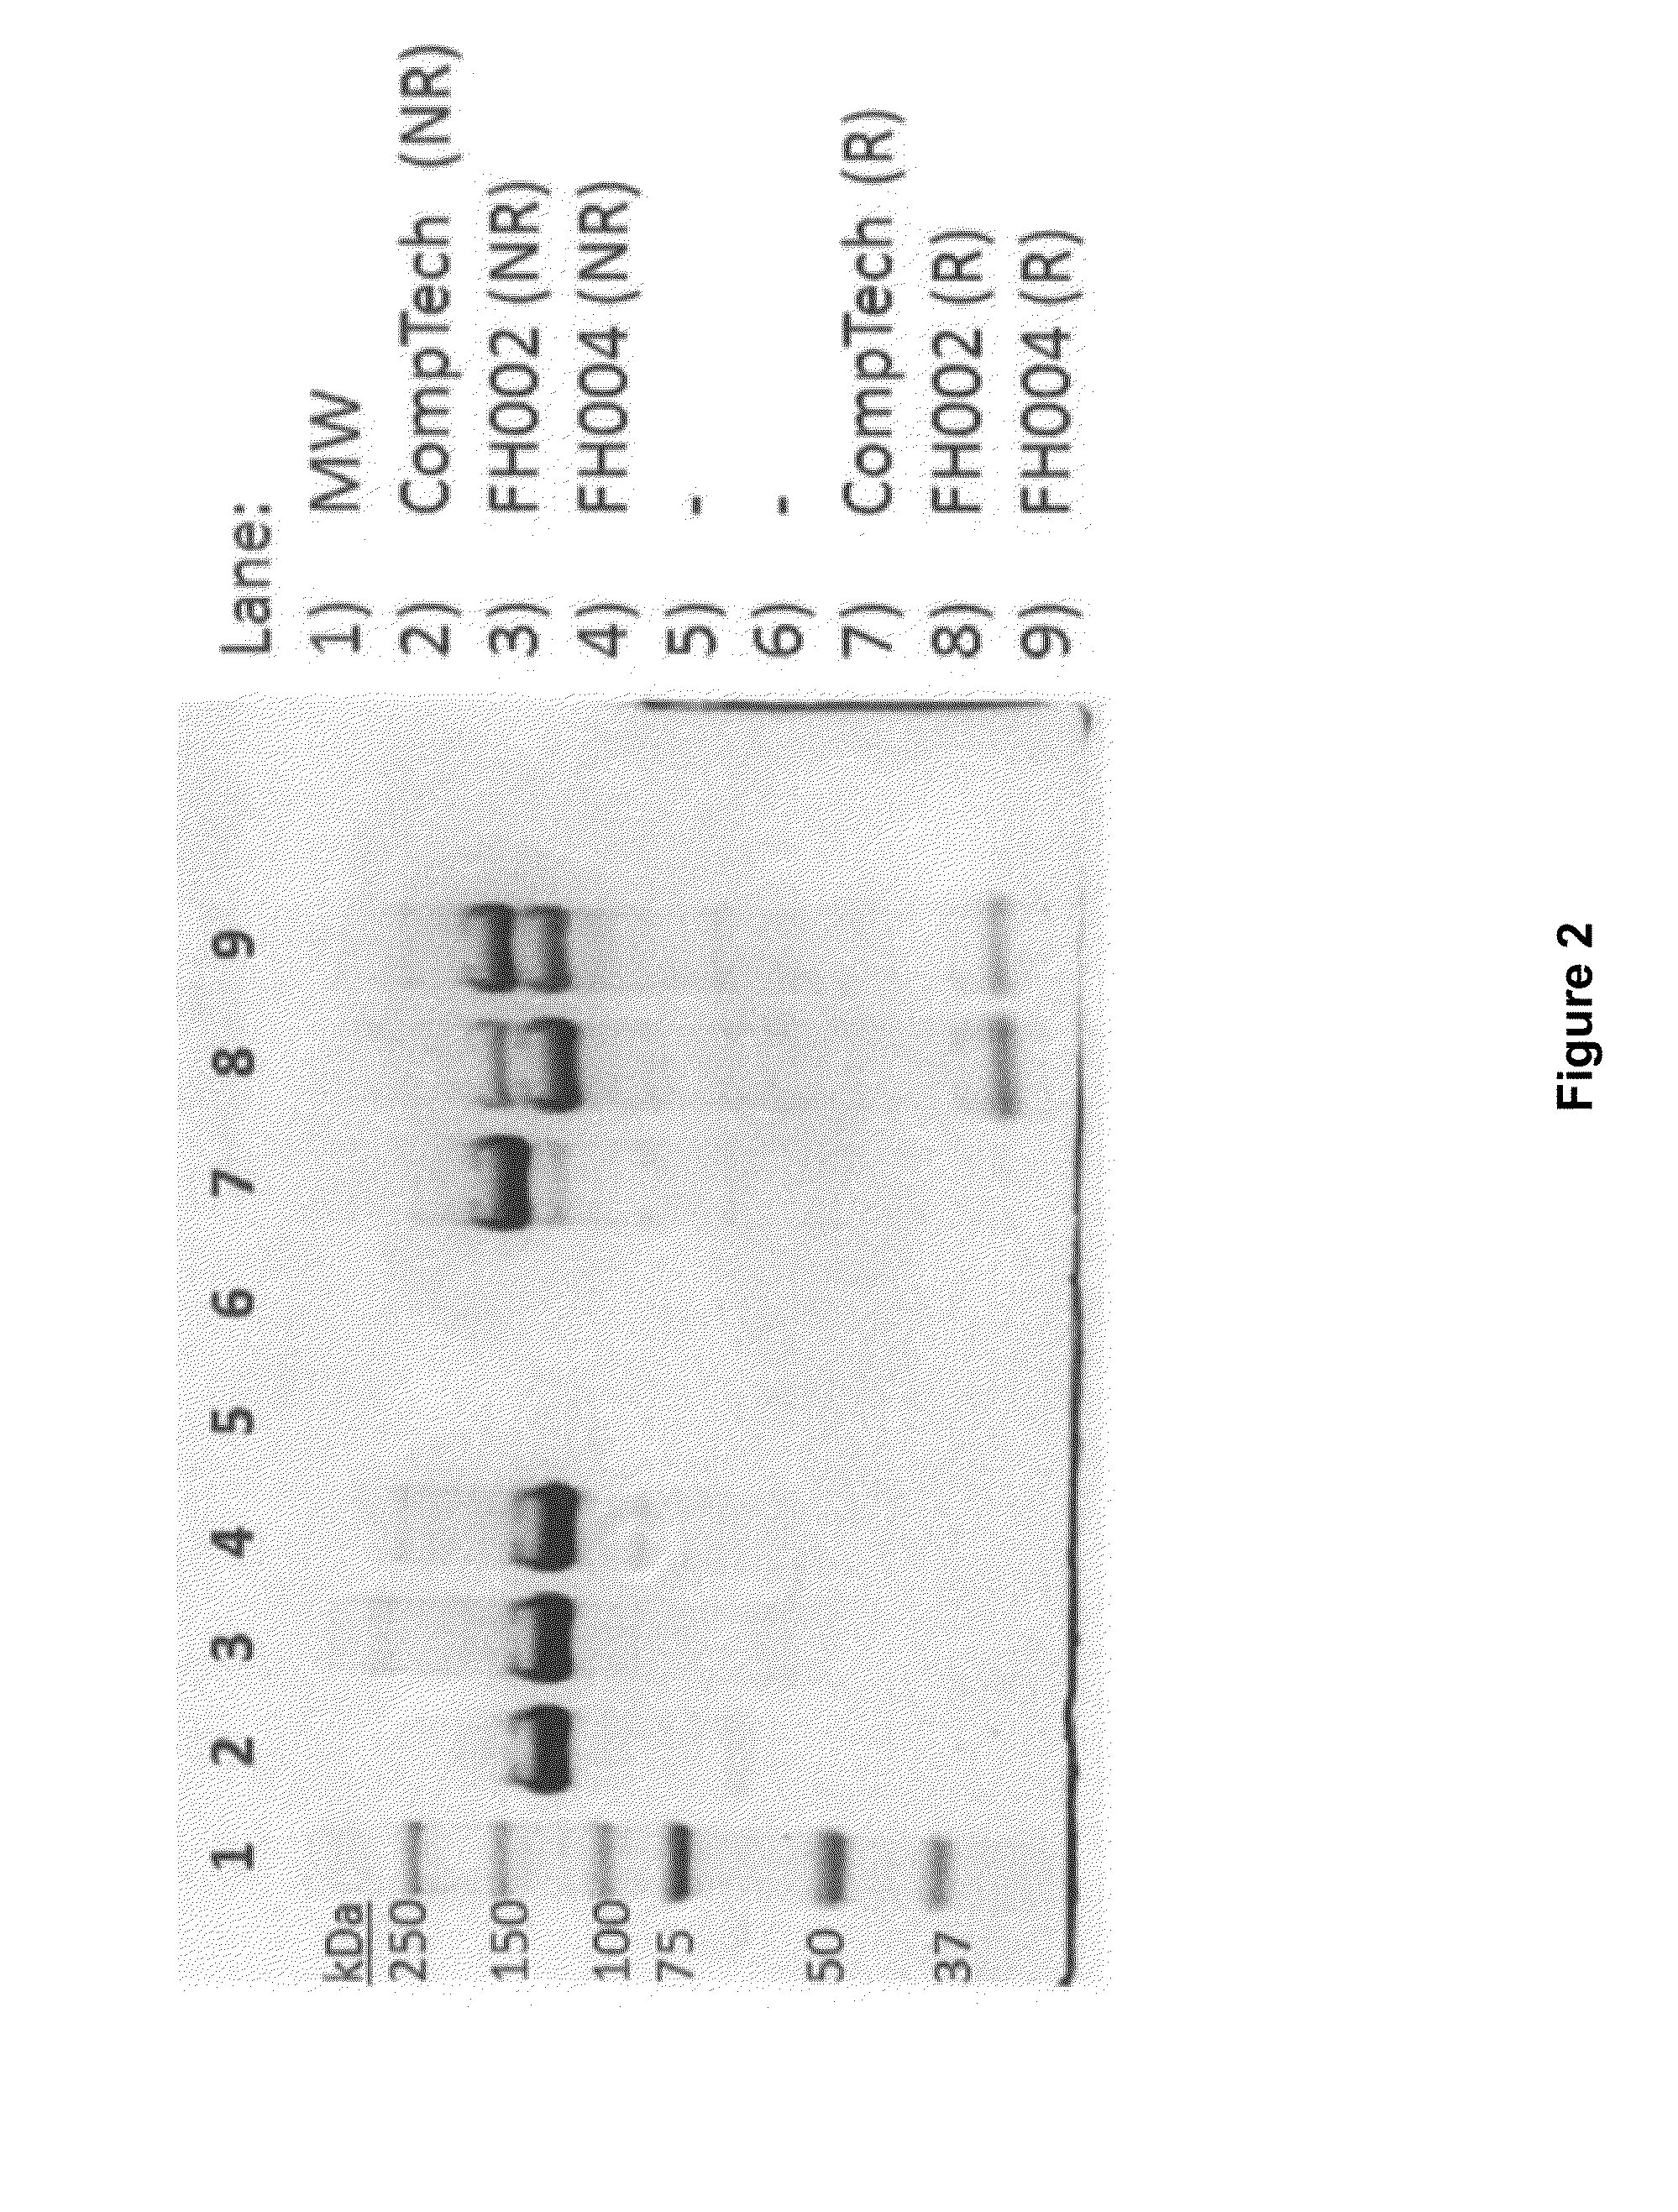 Method for producing factor h from a plasma precipitation fraction